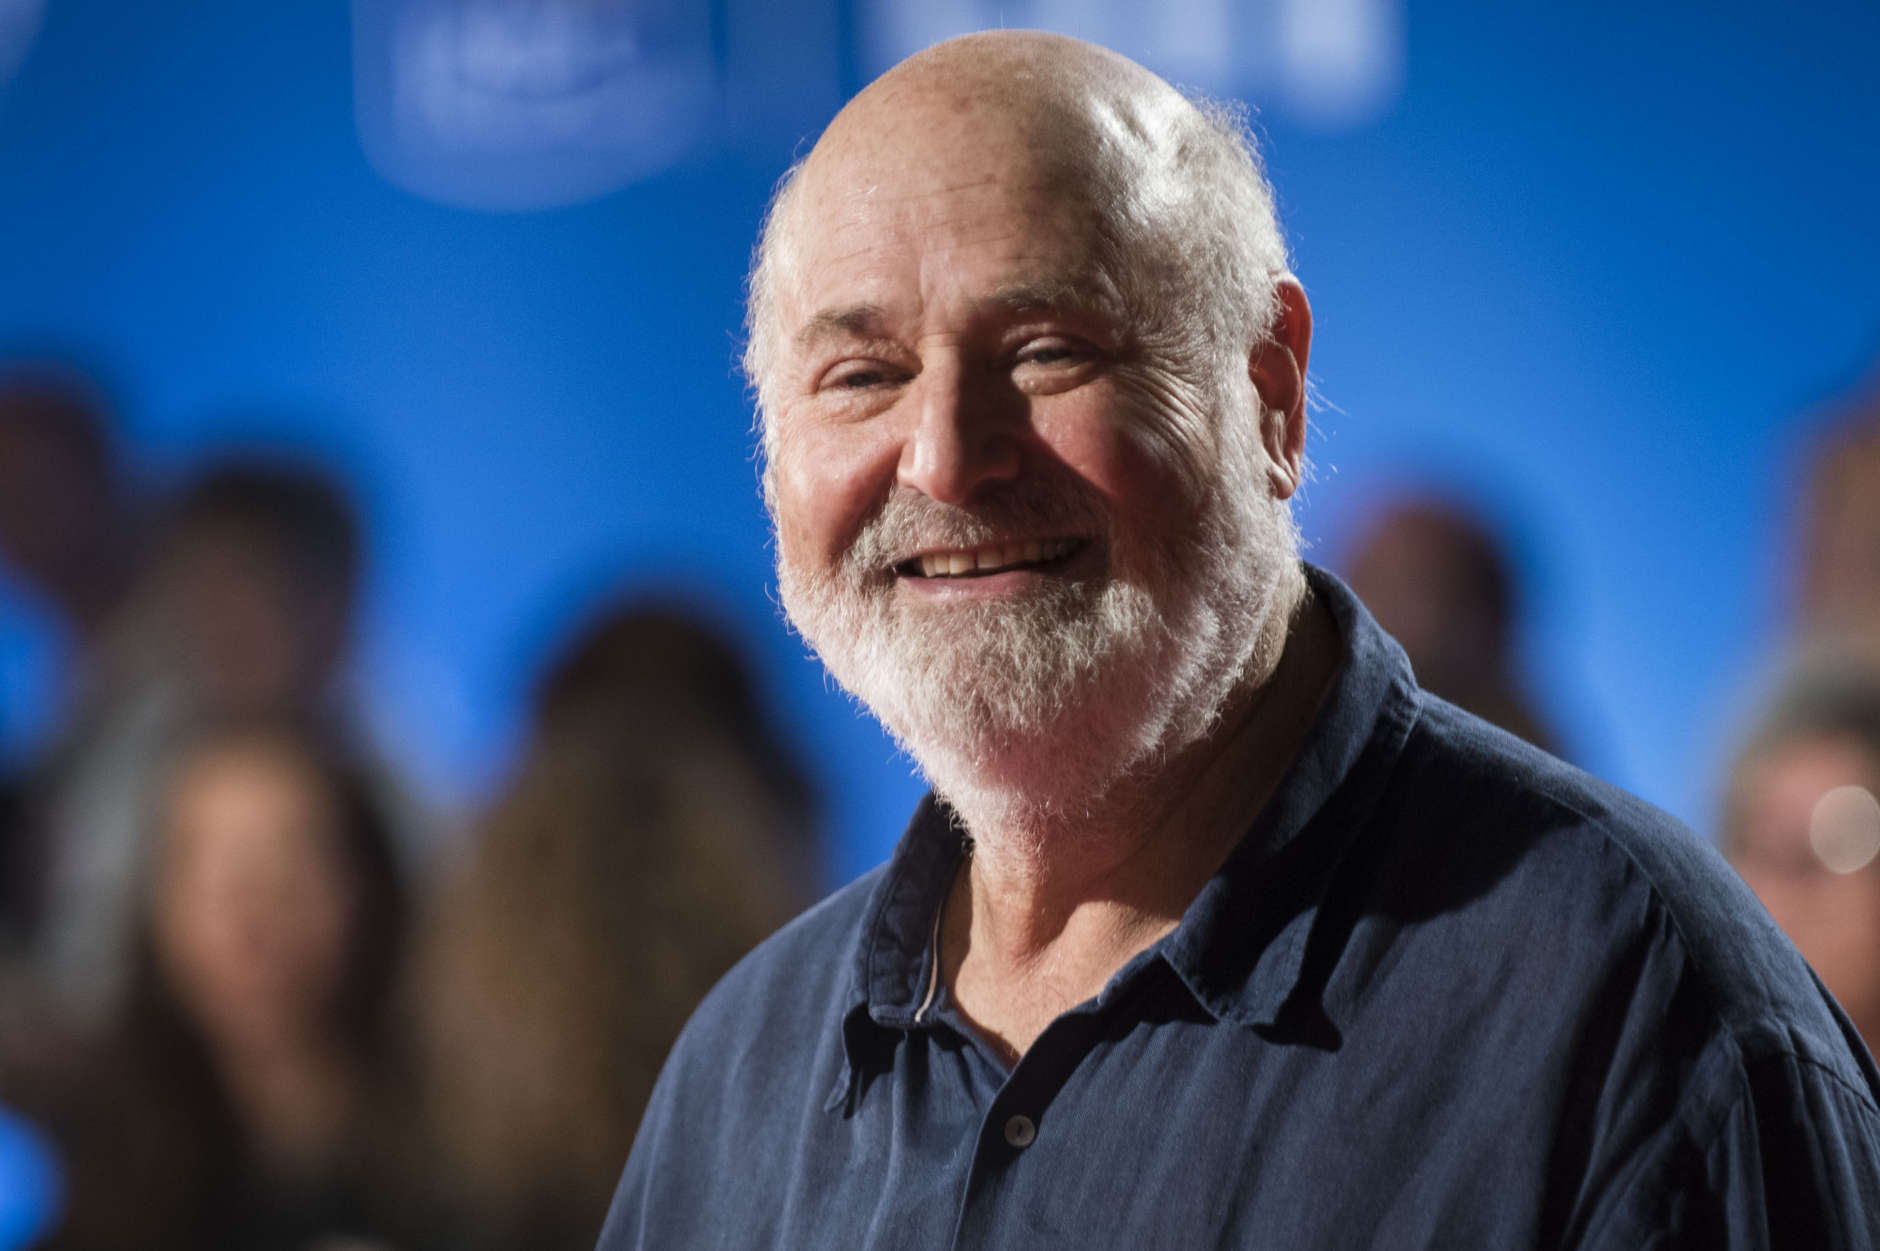 Director Rob Reiner attends the premiere for "LBJ" on day 8 of the Toronto International Film Festival at Roy Thomson Hall on Thursday, Sept. 15, 2016, in Toronto. (Photo by Arthur Mola/Invision/AP)